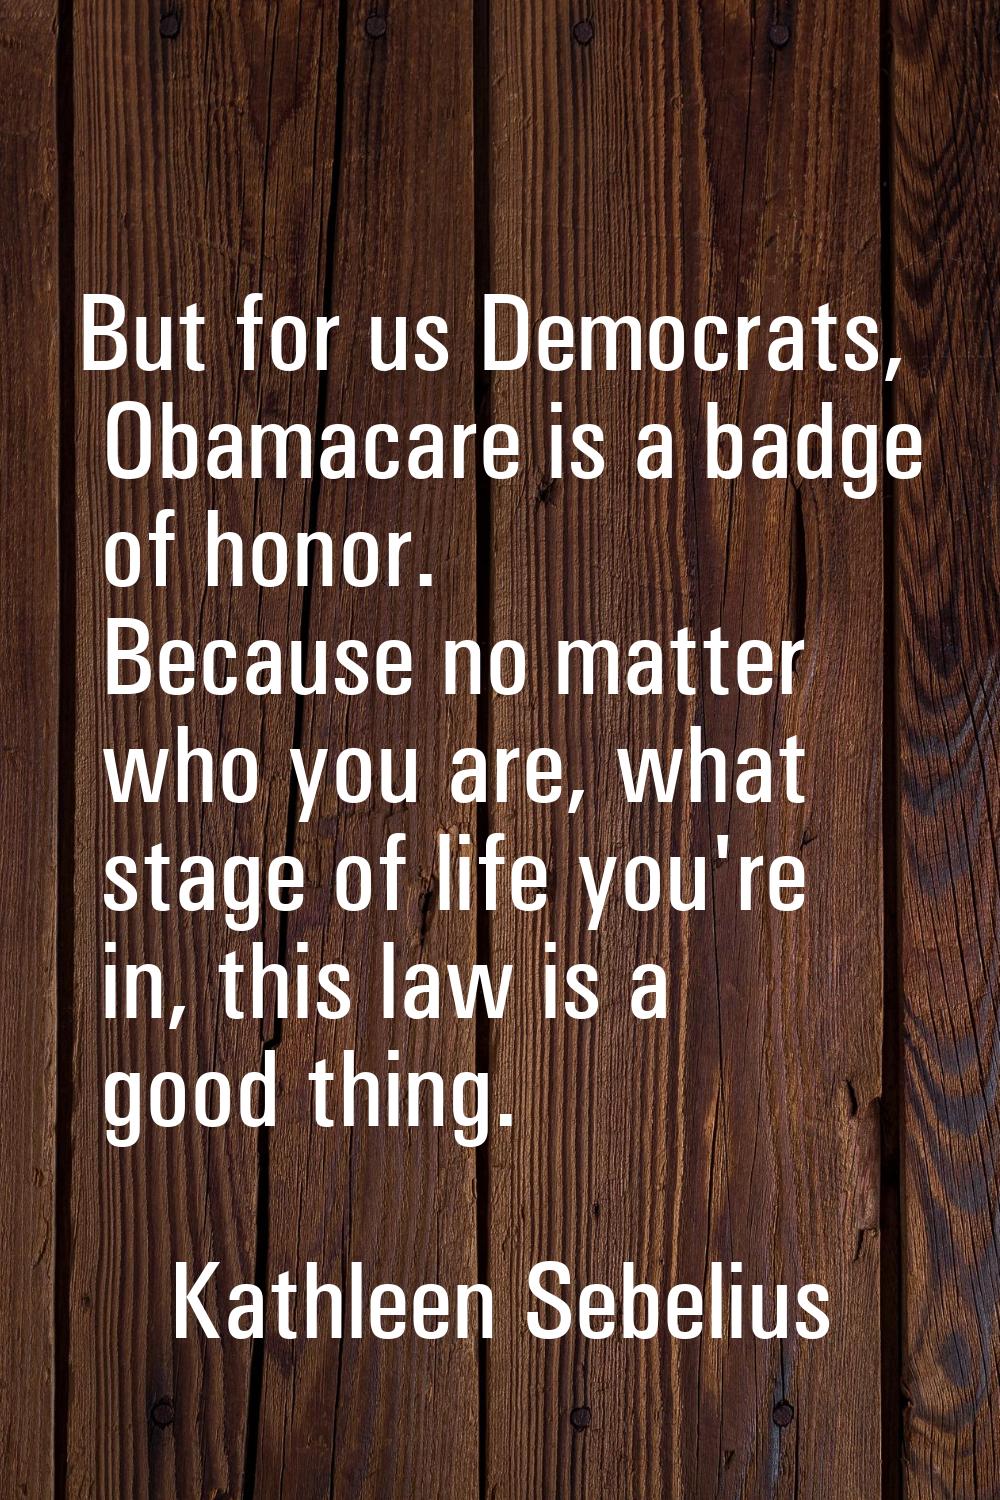 But for us Democrats, Obamacare is a badge of honor. Because no matter who you are, what stage of l